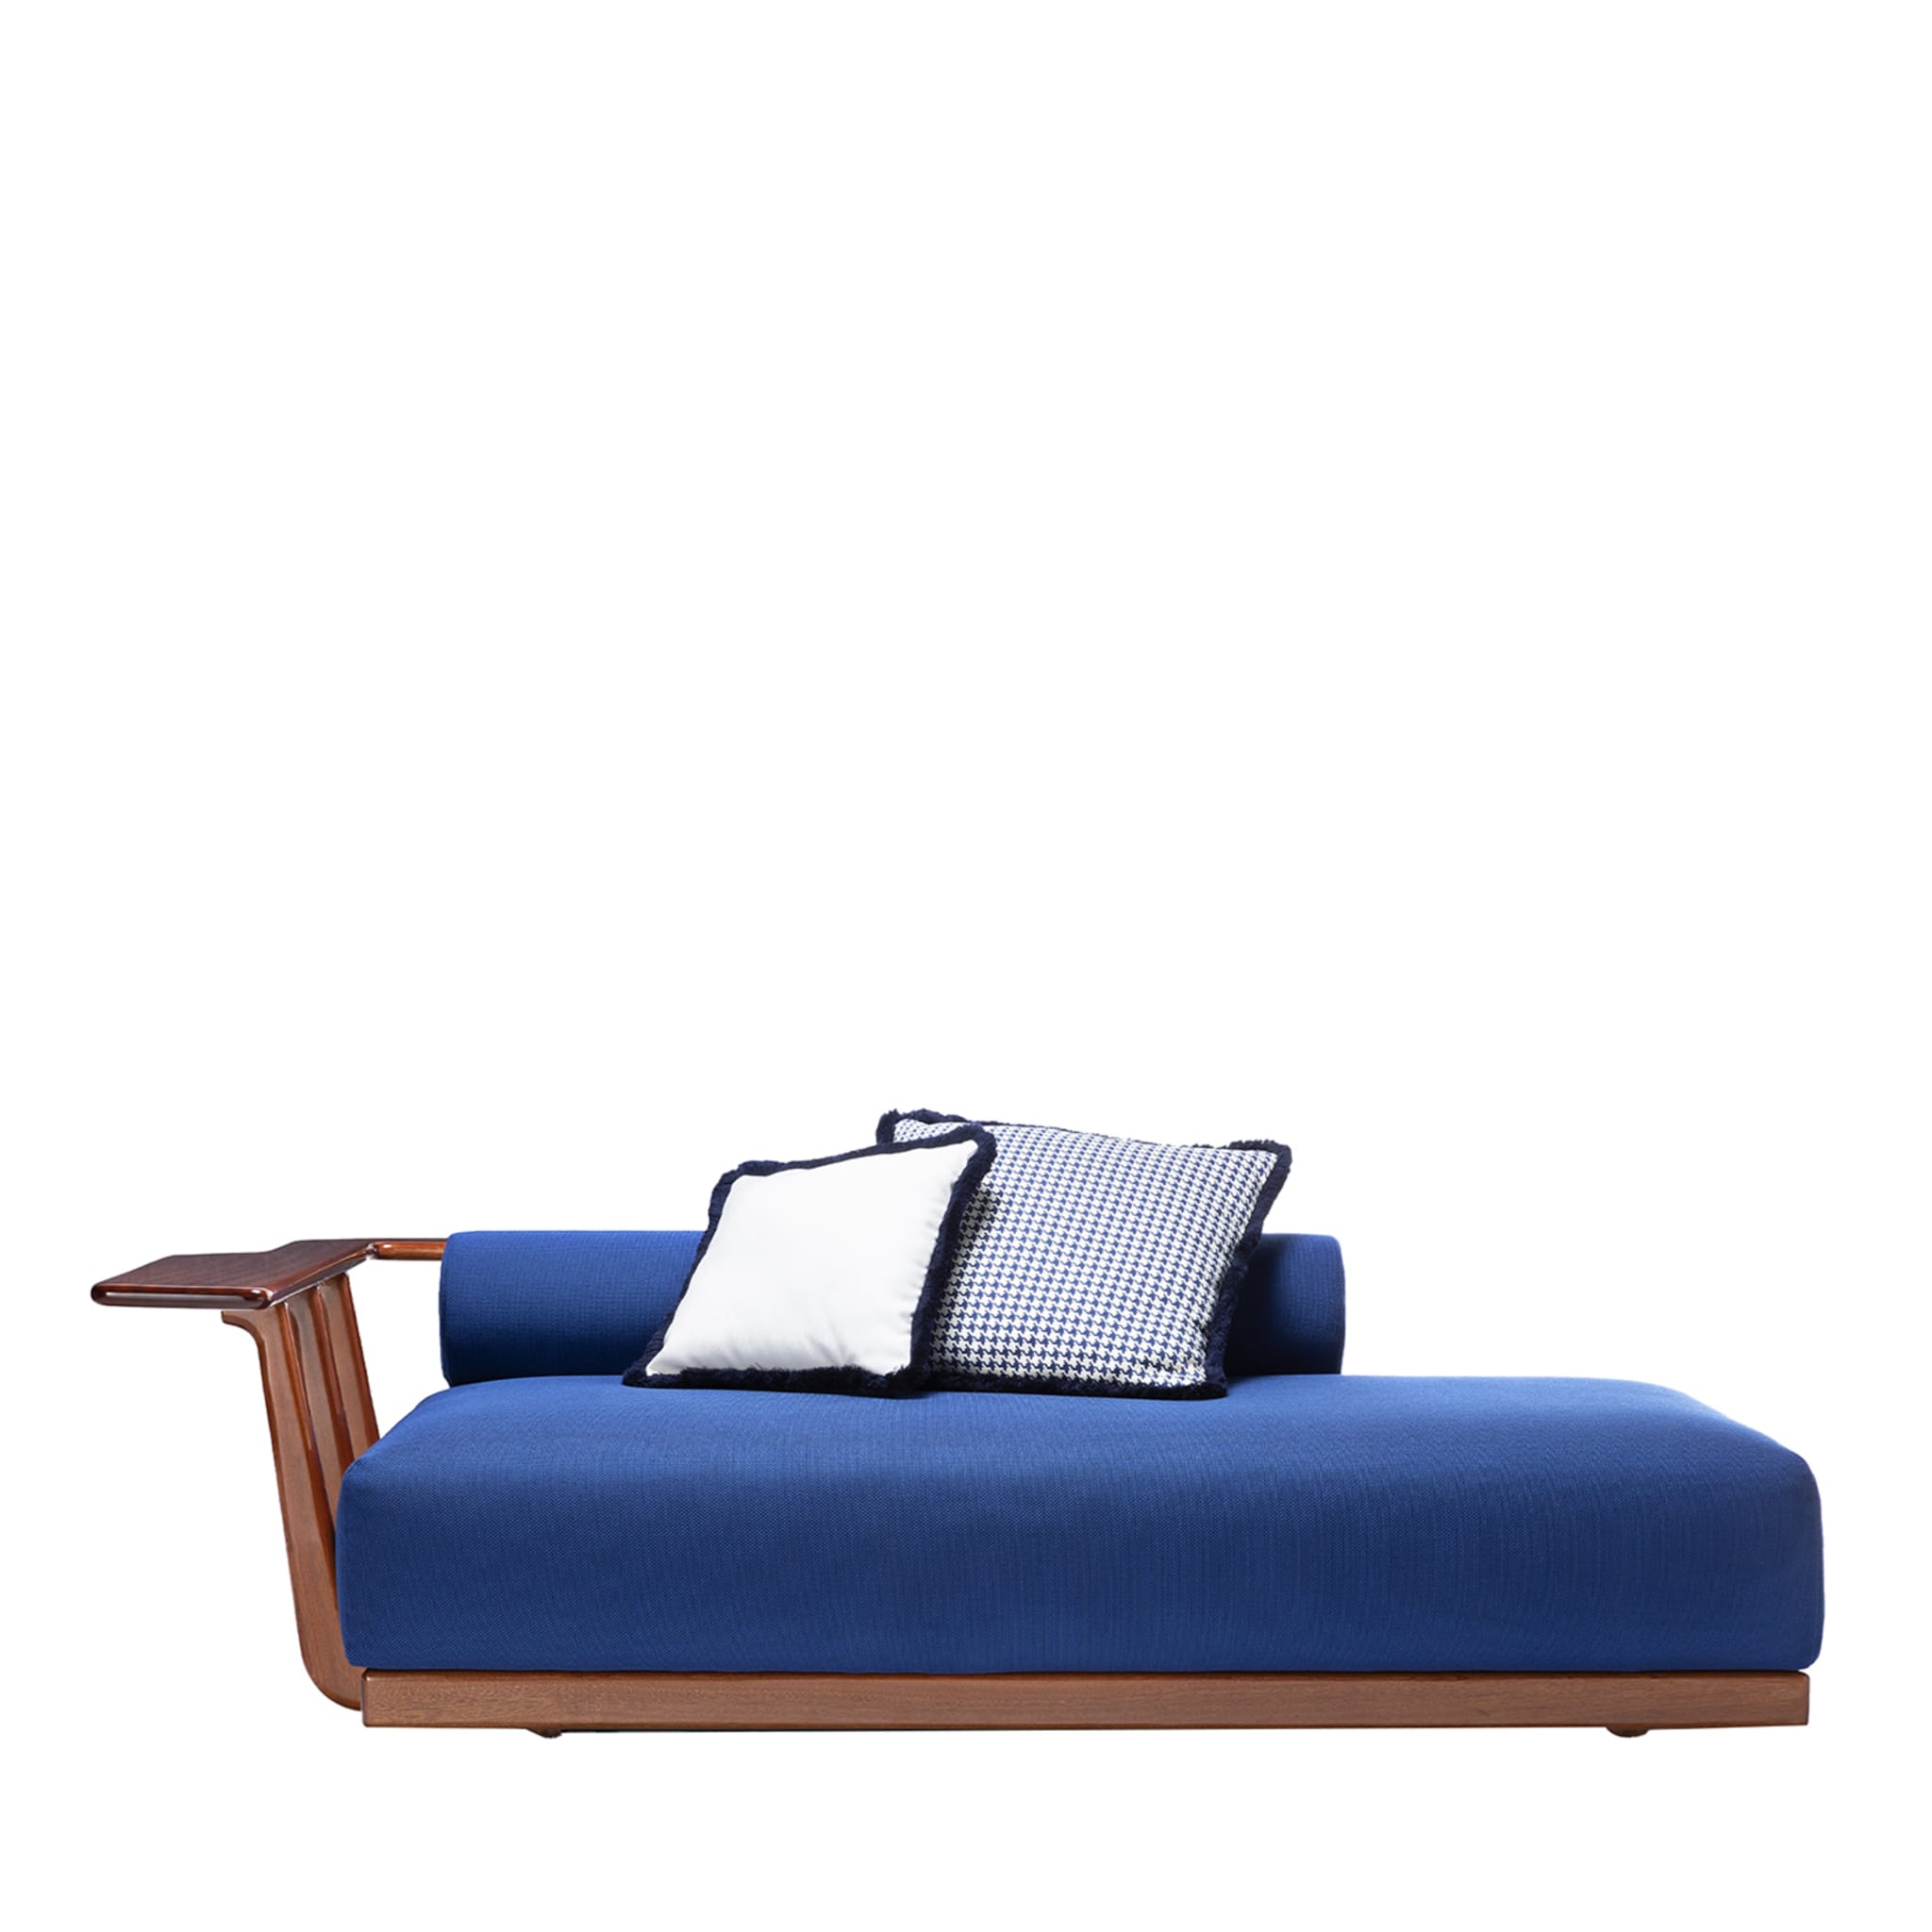 Sunset Platform Sofa with Side Table by Paola Navone - Main view